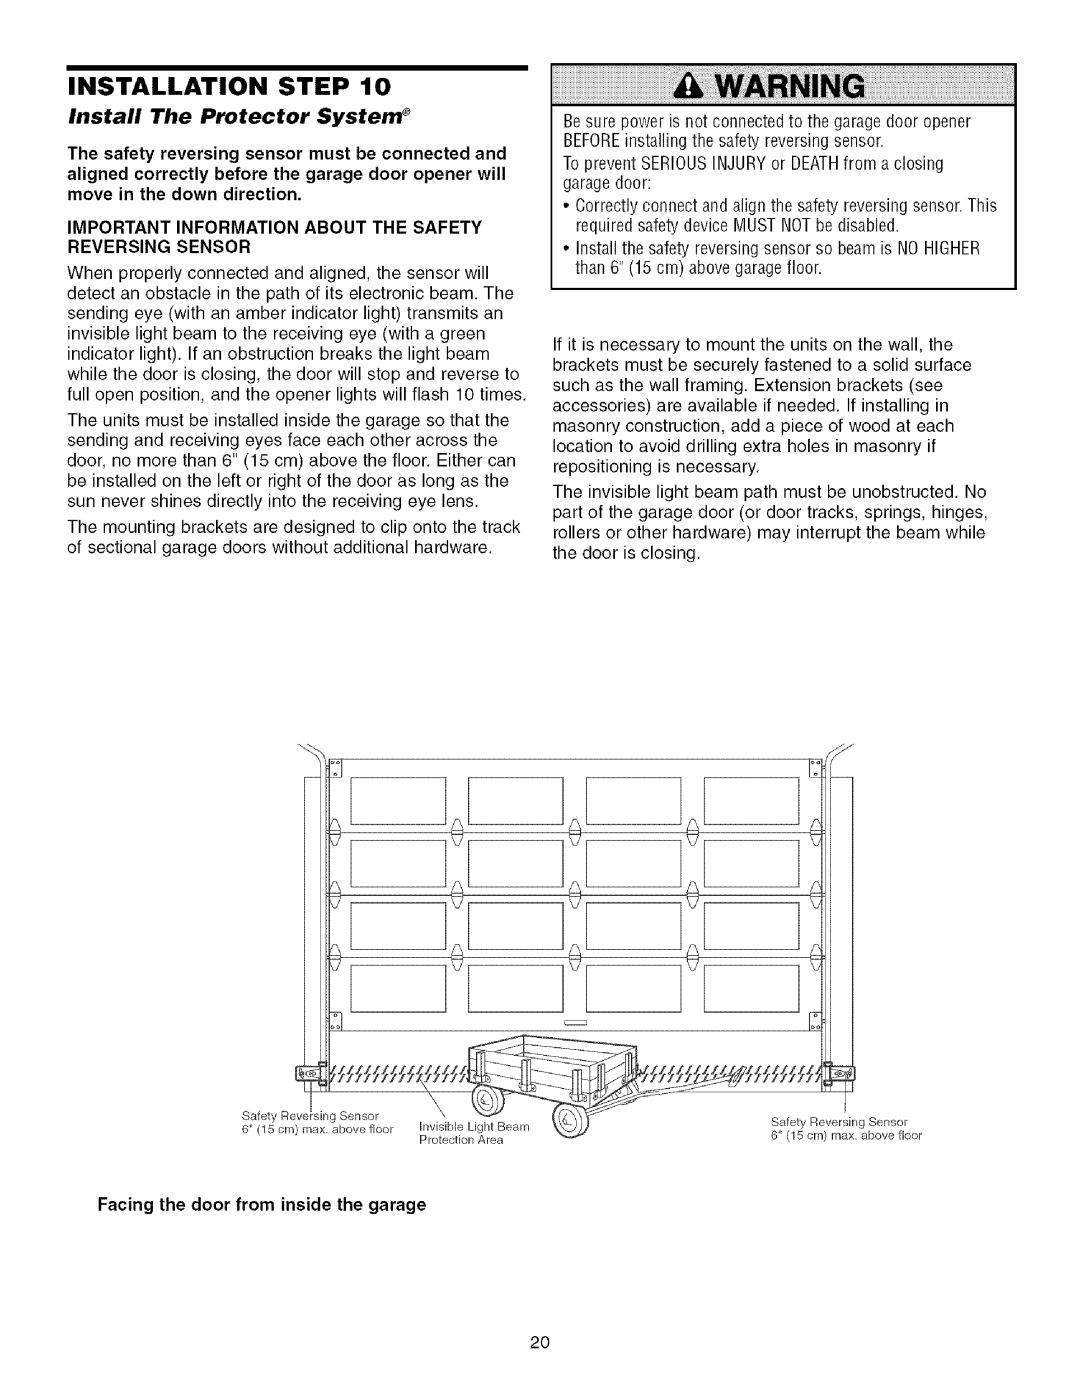 Sears 139.53930D owner manual Install The Protector System, Important Information about the Safety Reversing Sensor 